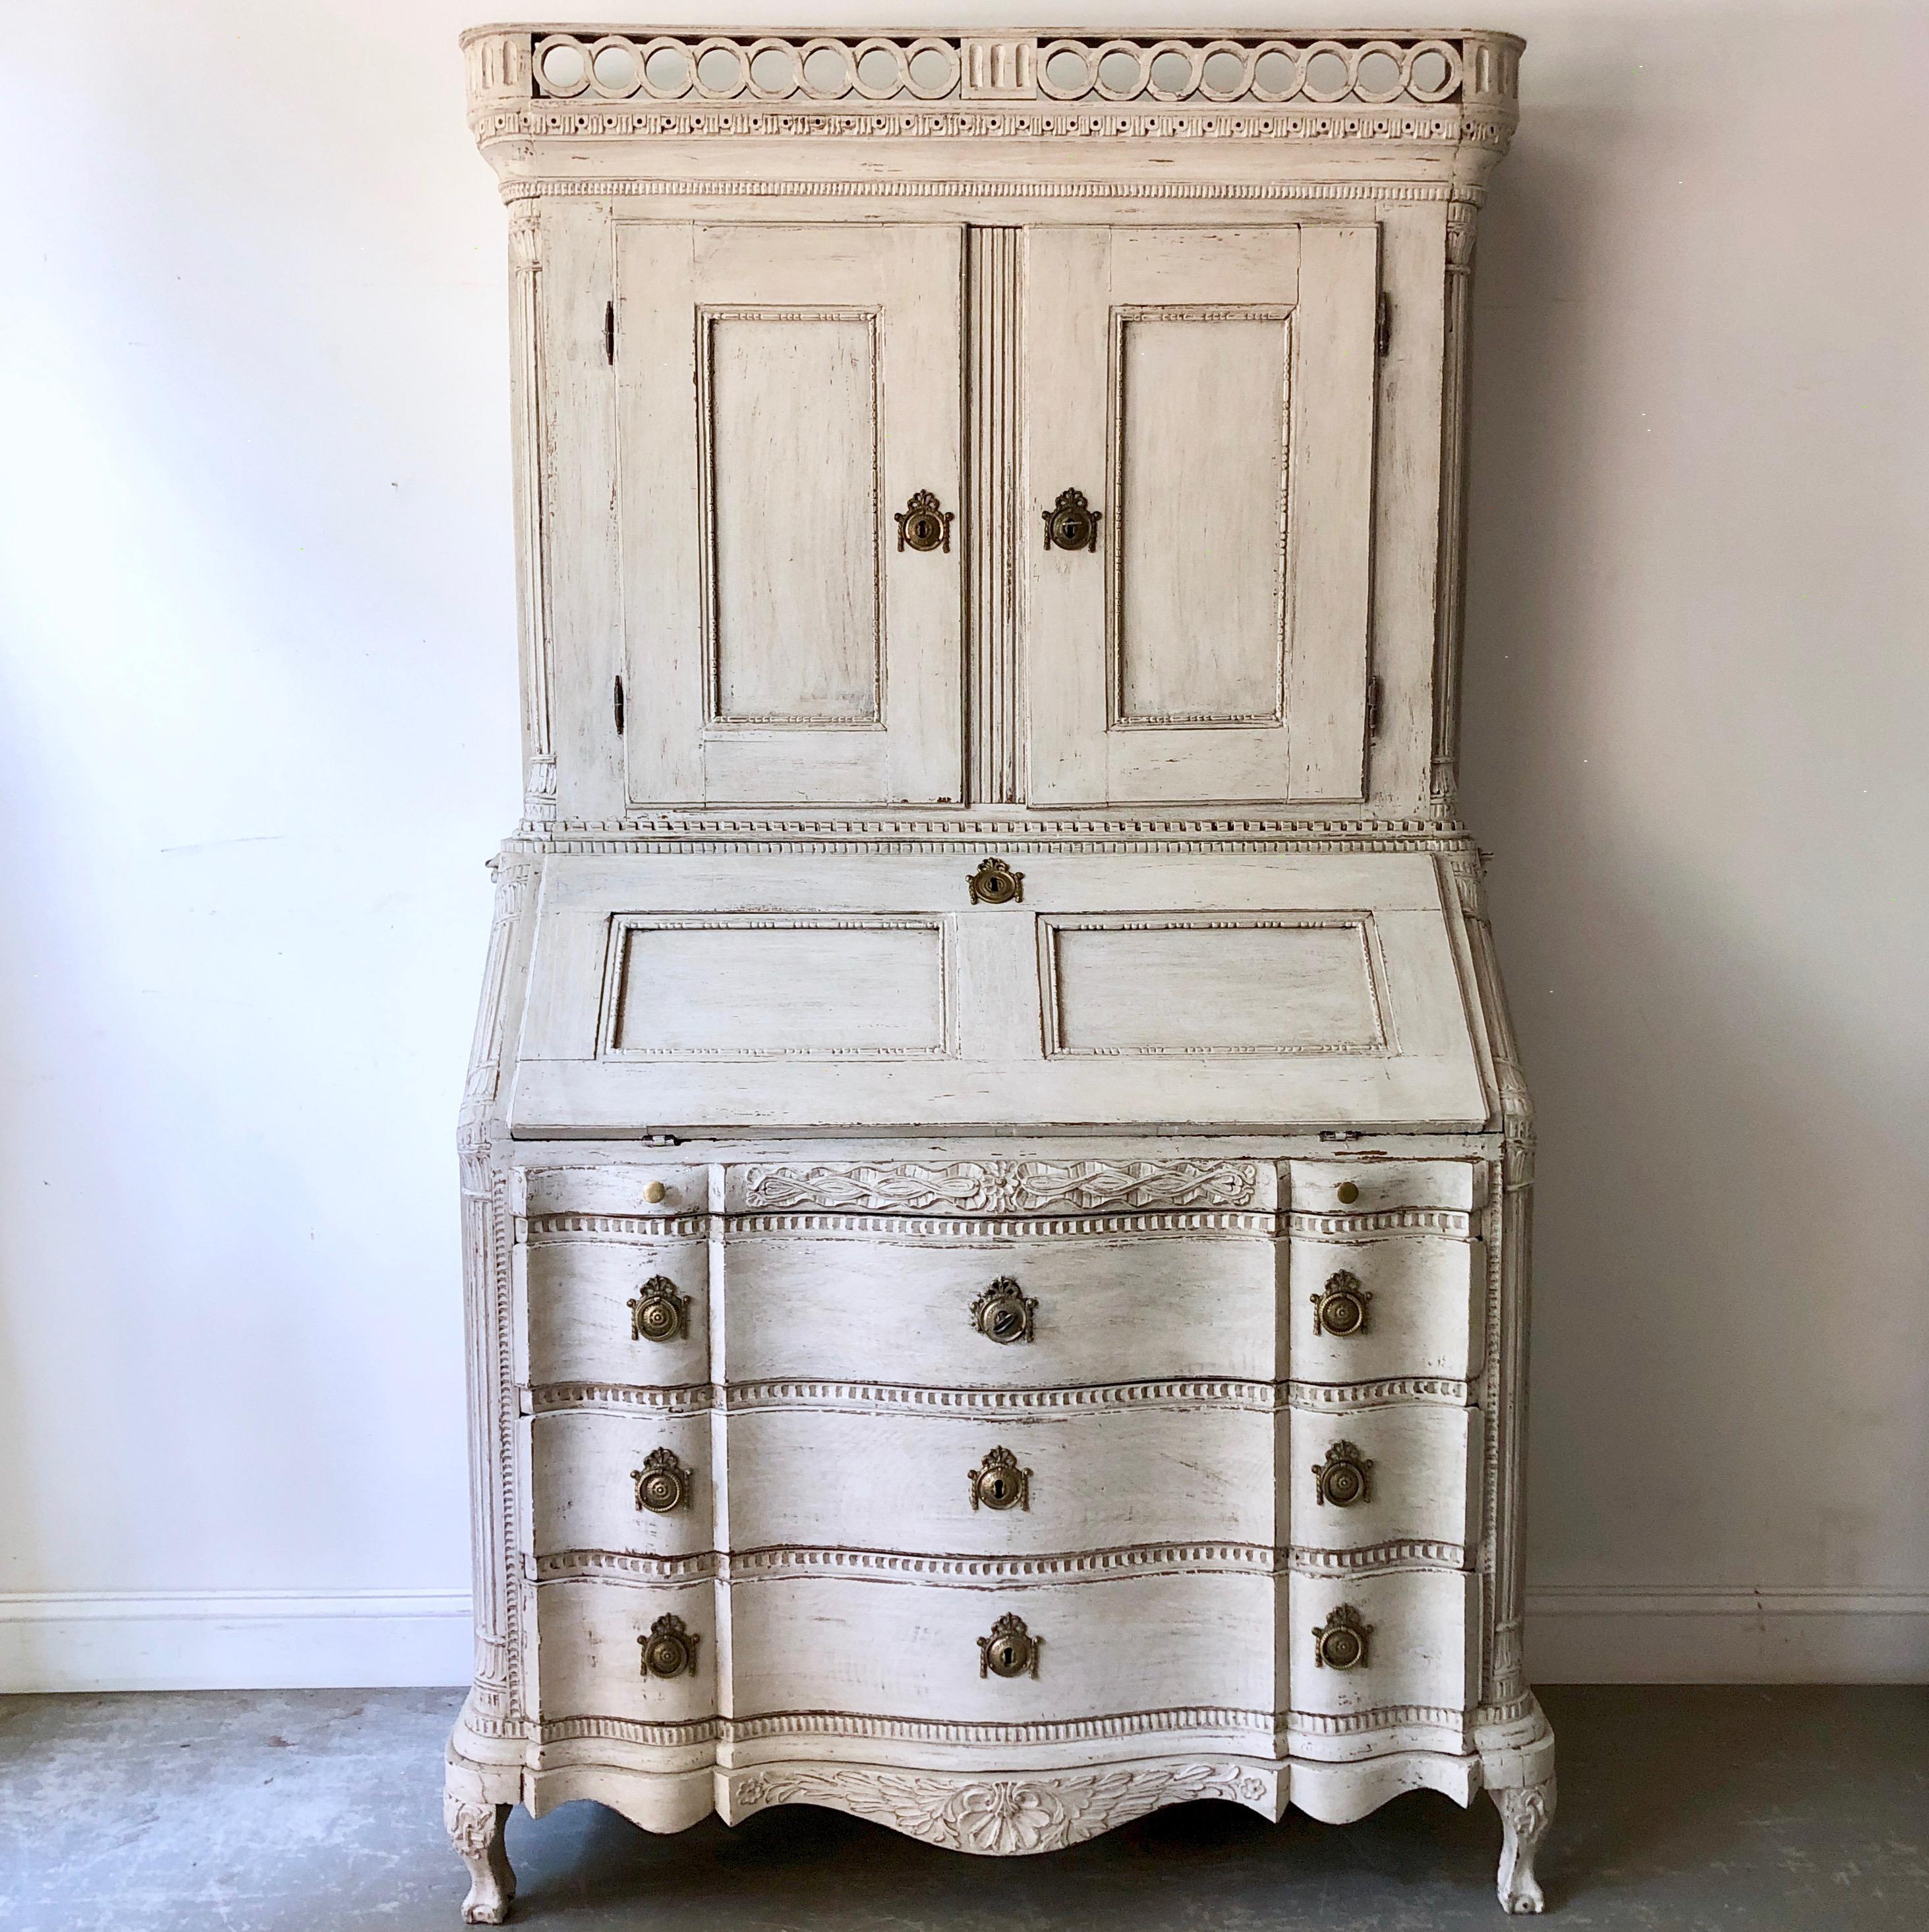 Very fine example of 18th century Scandinavian Baroque period secretaire with richly carved balcony pediment cornice and serpentine fronted drawers, carved fall front desk with several small drawers and compartments on carved cabriole feet,
circa